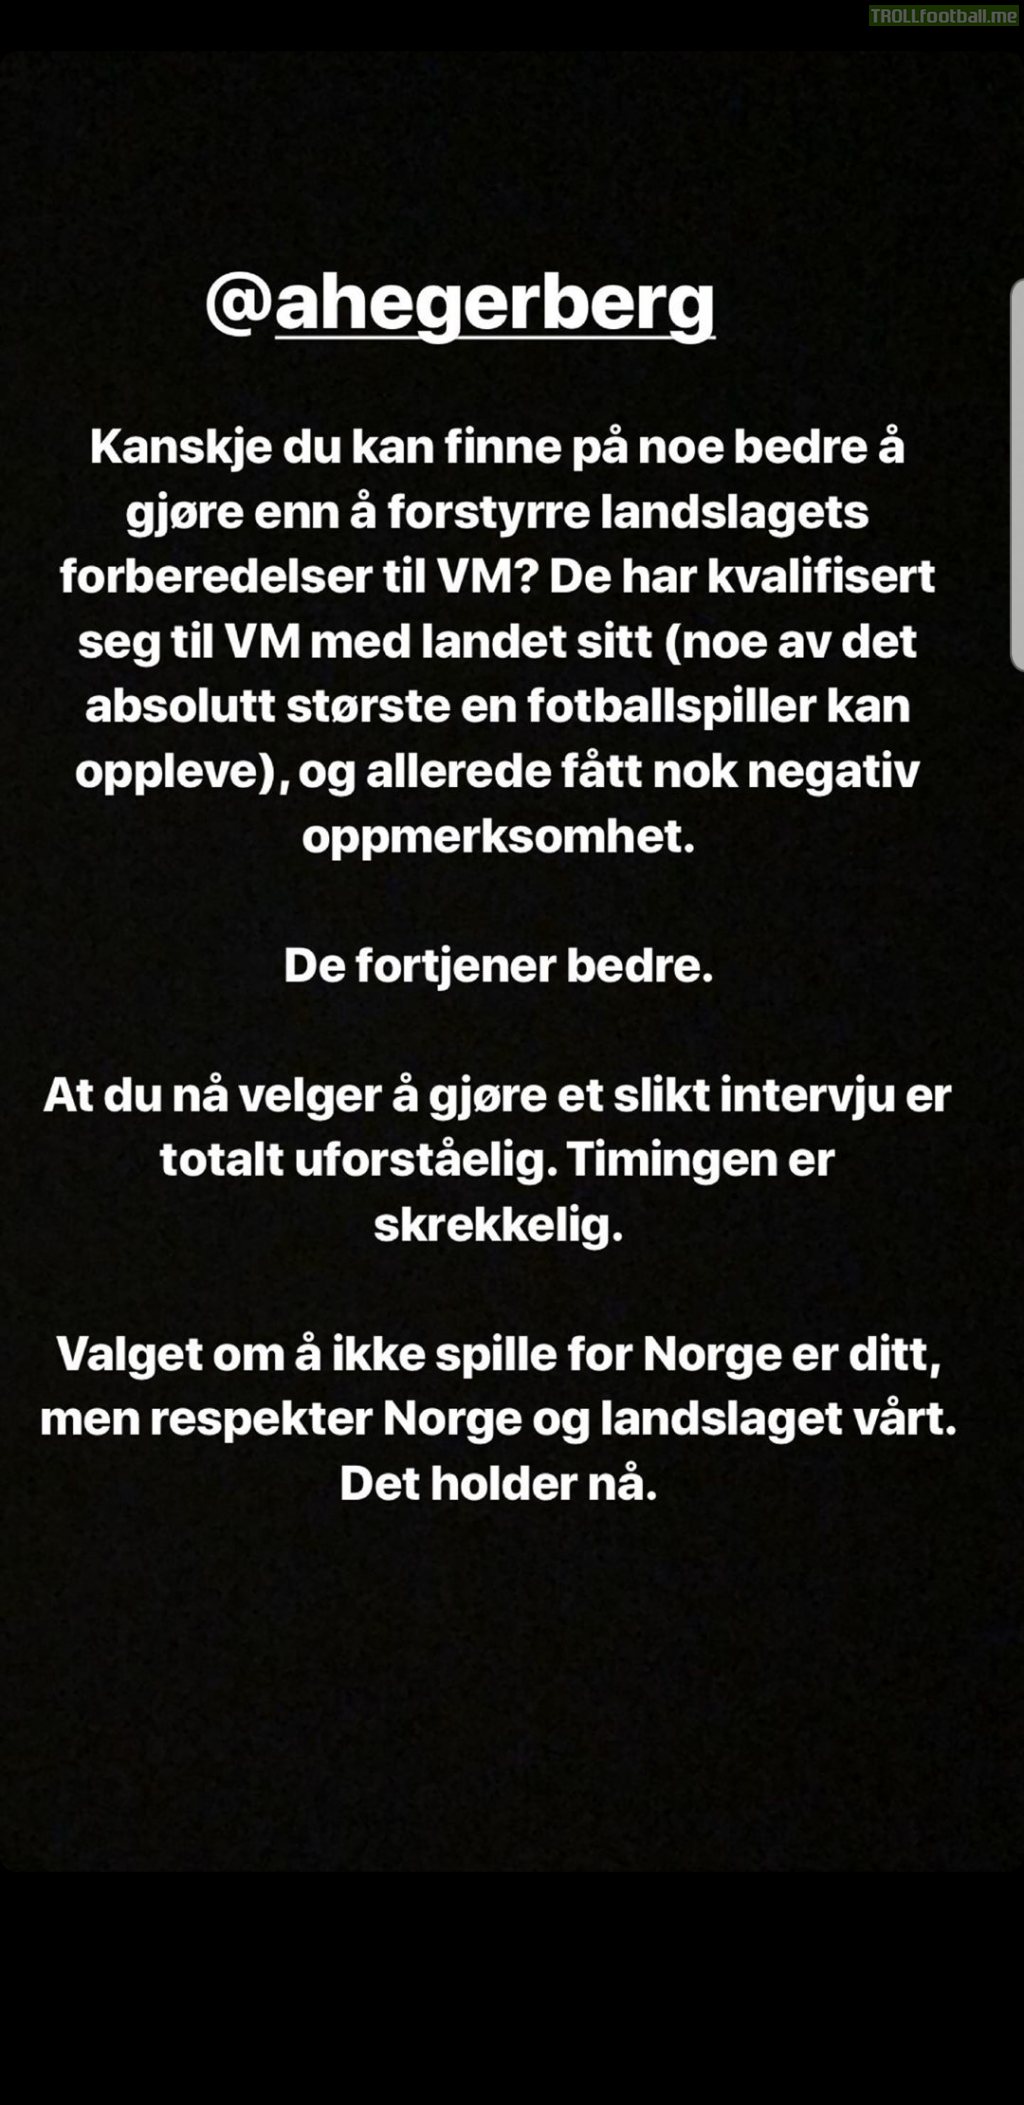 Martin Ødegaard's message to Ada Hederberg following her controversial interview